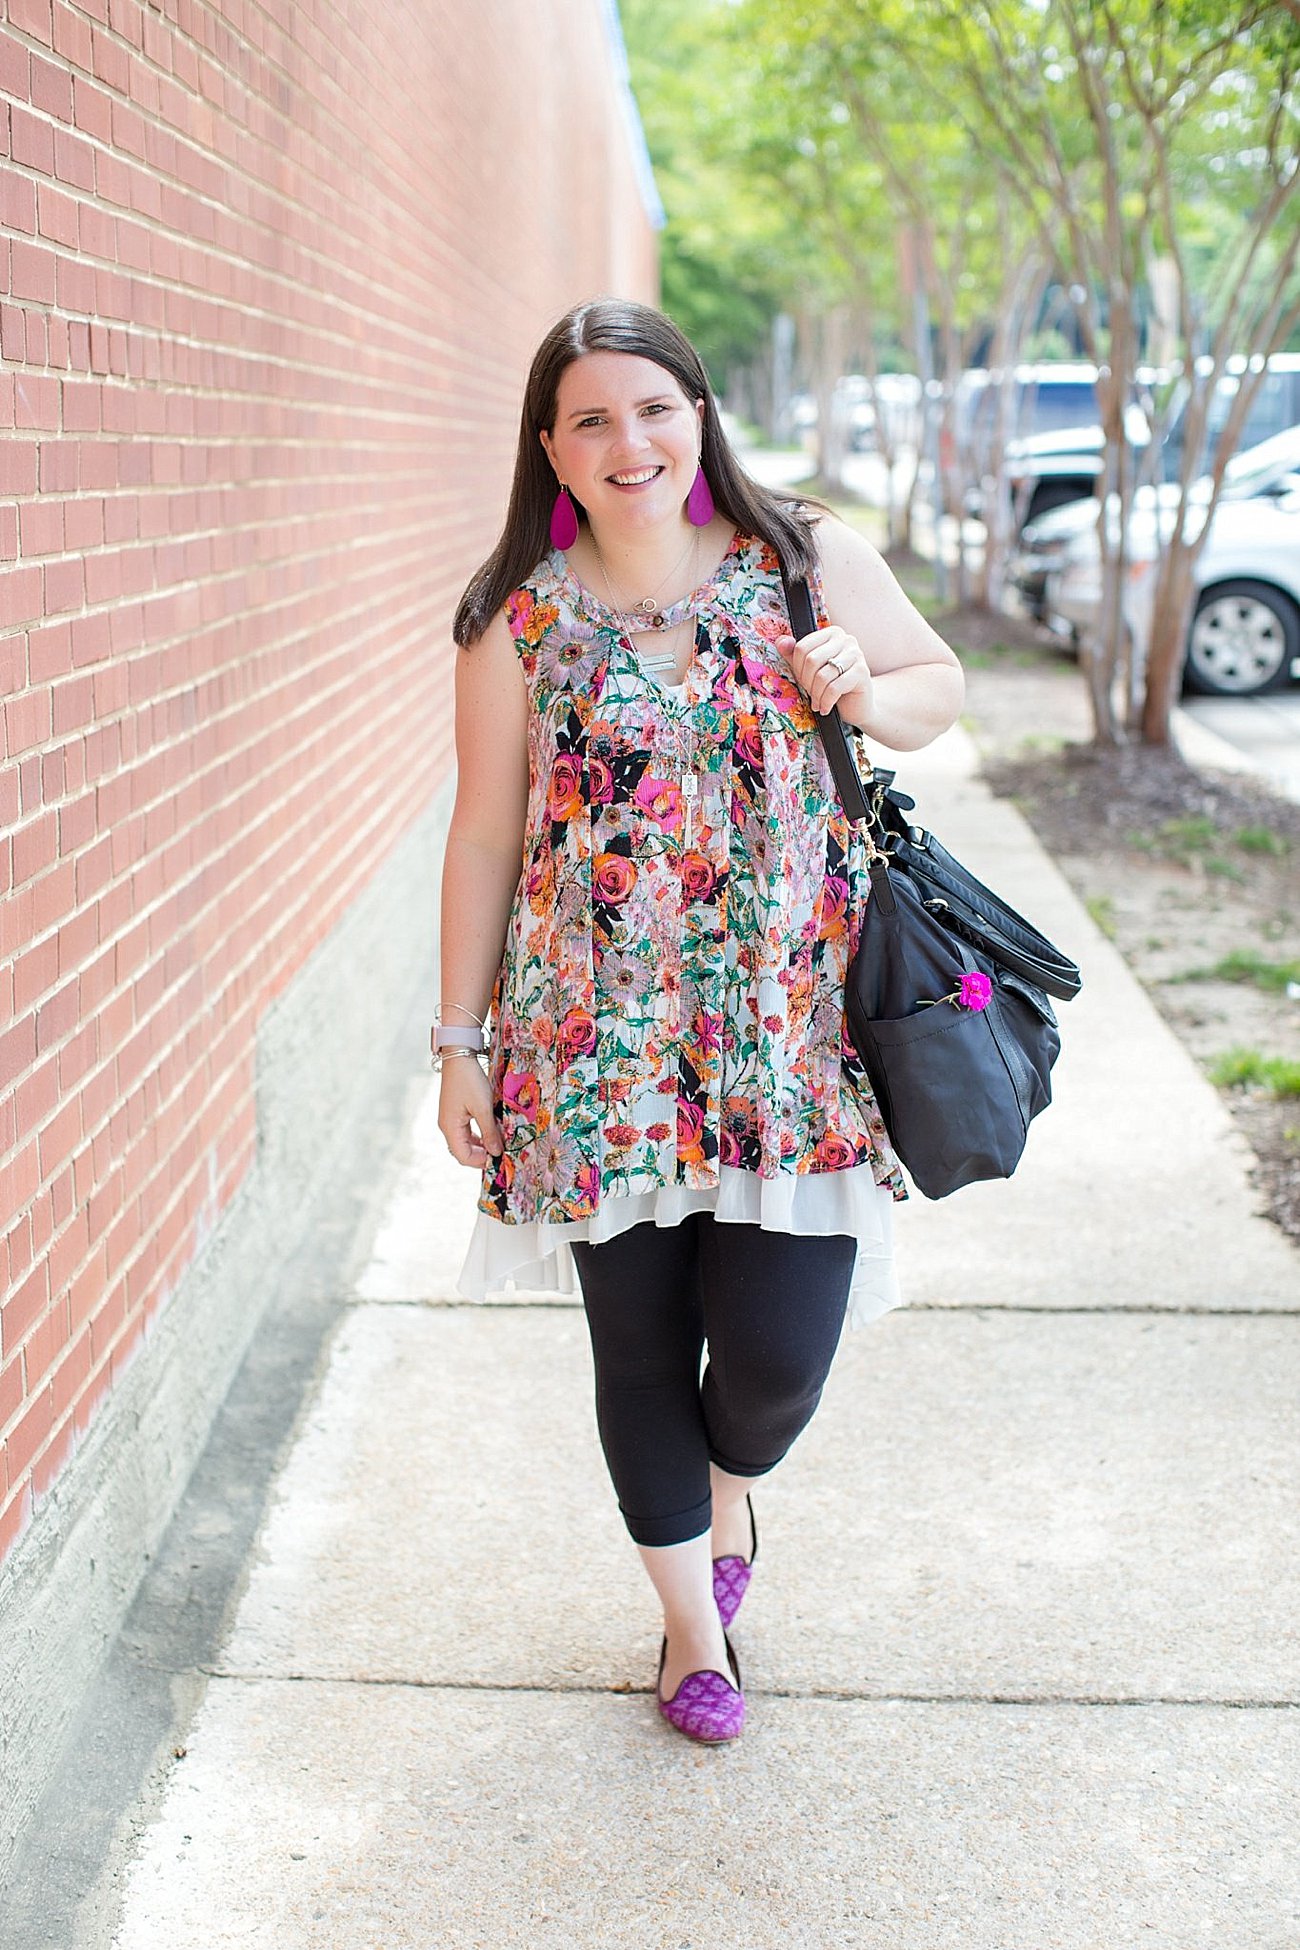 Grace & Lace floral tunic, chiffon lace extender, LulaRoe black leggings, Lily Jade diaper bag, Nickel and Suede earrings, The Root Collective "Millie" smoking shoes | North Carolina Fashion Blogger (12)